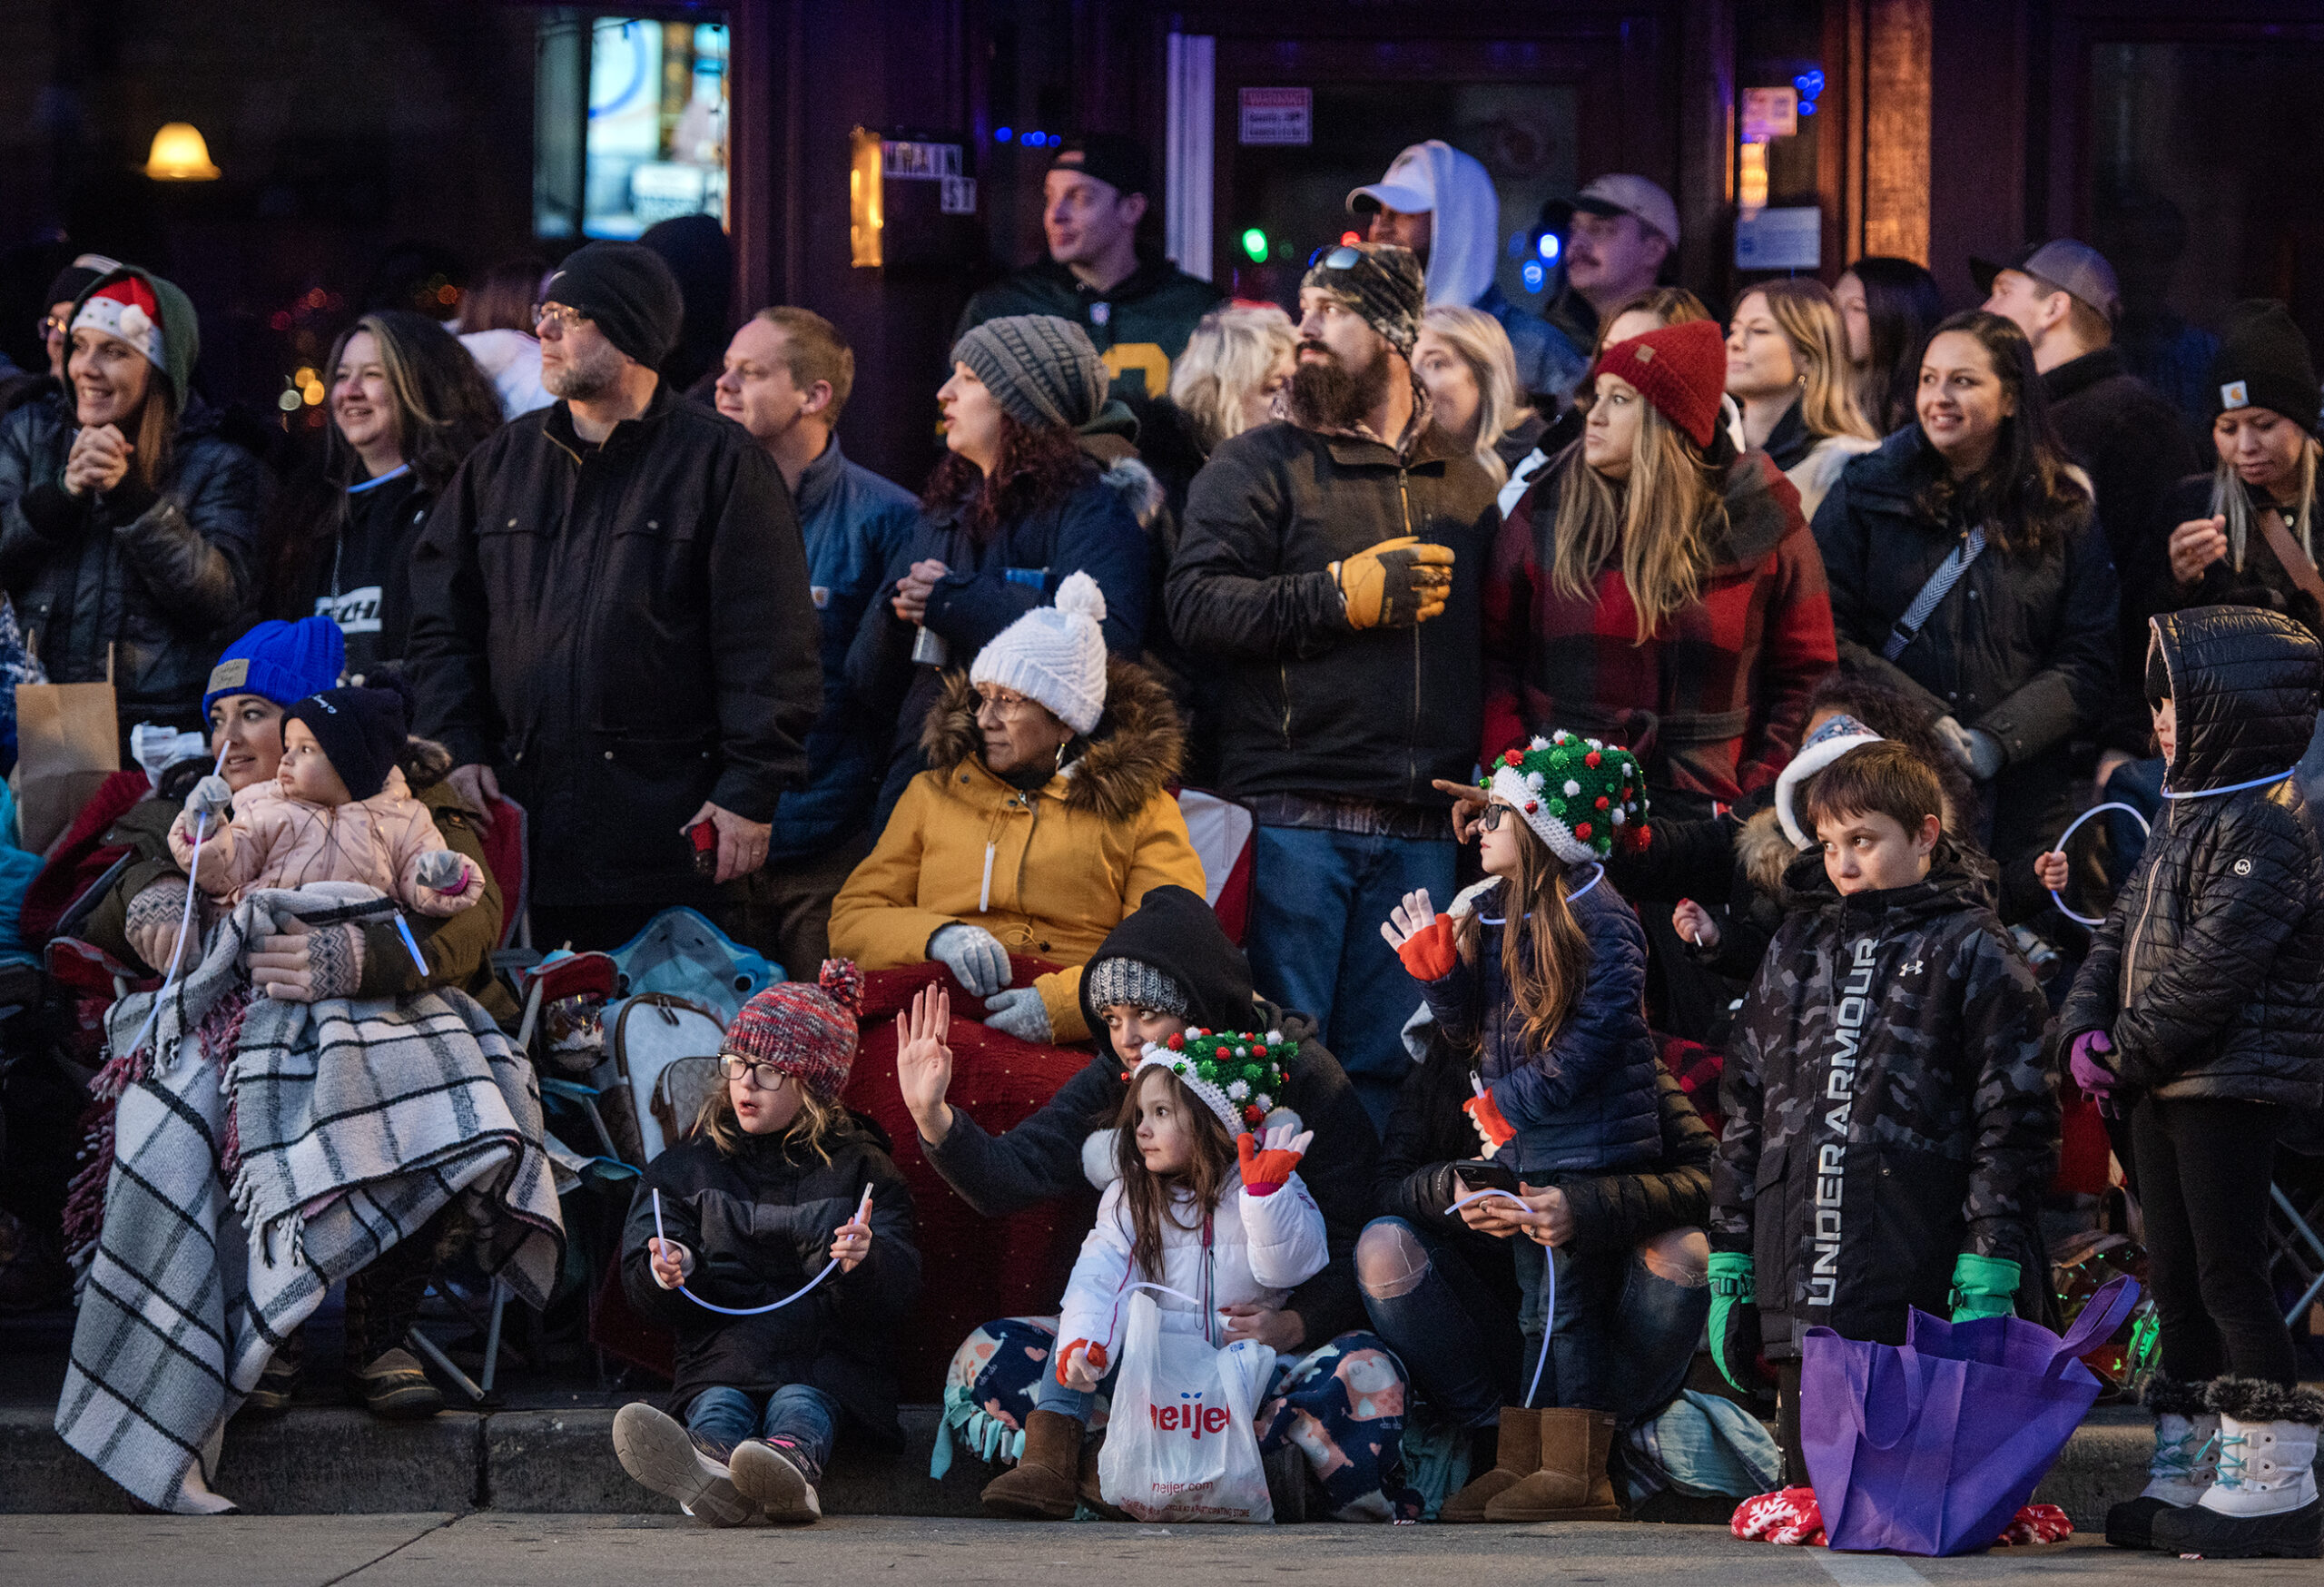 A crowd of parade attendees gather together wearing winter gear.